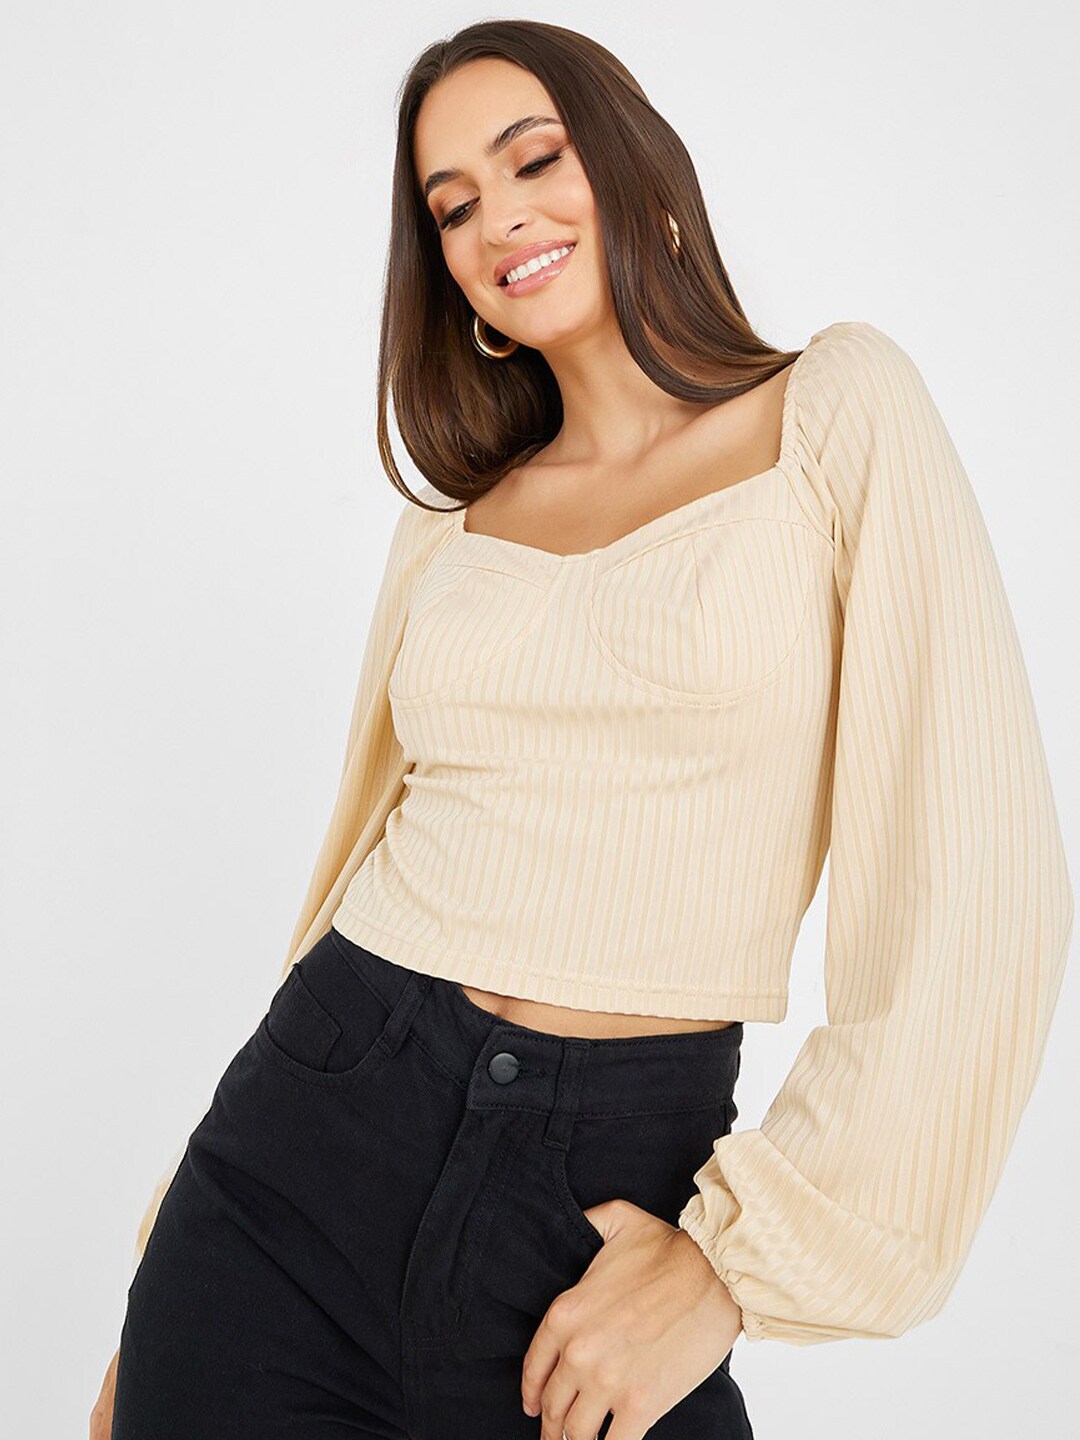 Styli Beige Striped Sweetheart Neck Crop Top Price in India